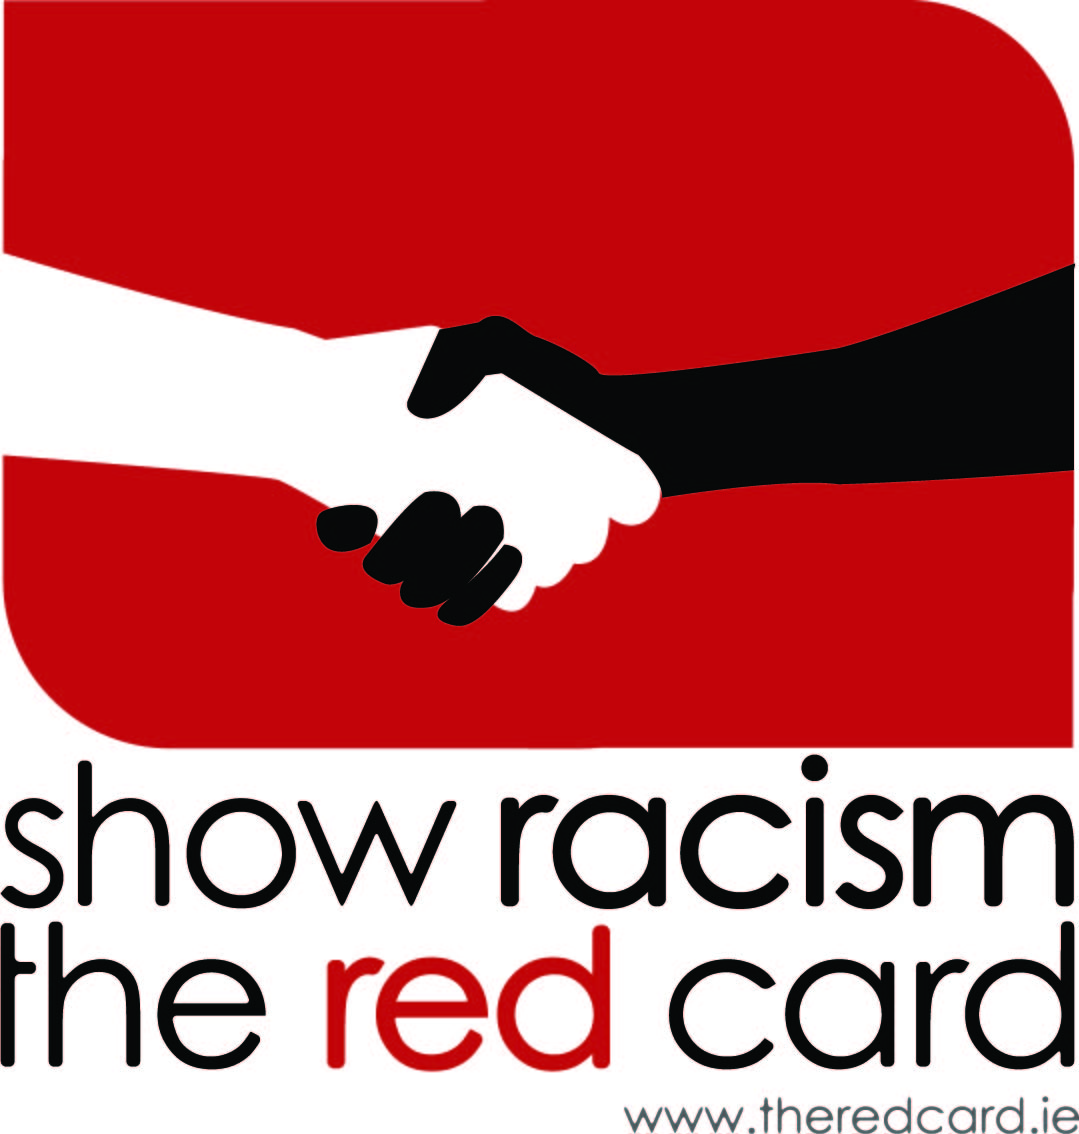 red card racism